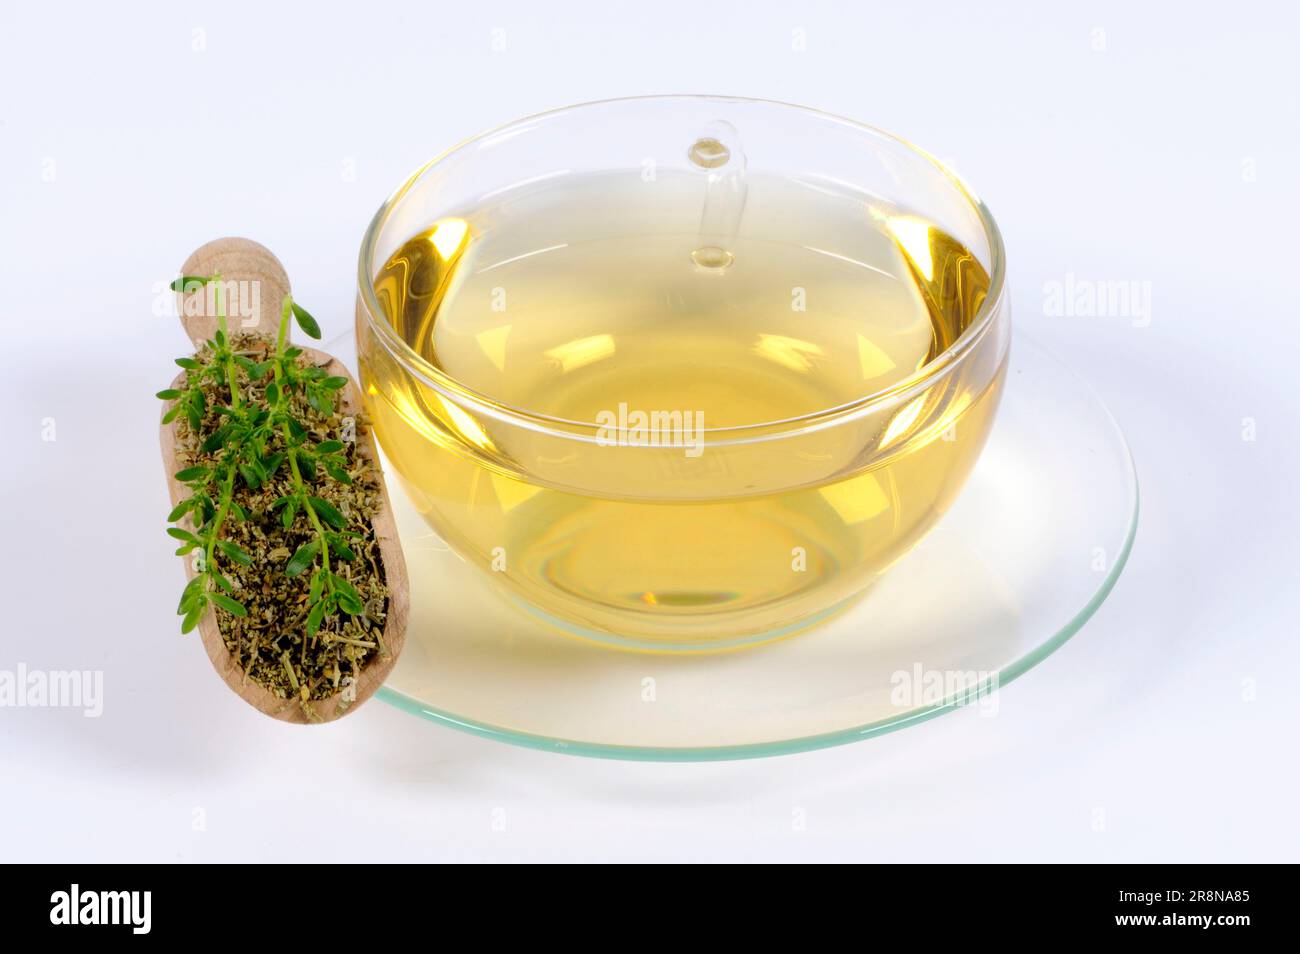 Herniaria glabra (Herniaria glabra), Cup of Rupturewort Tea, Smooth Centaury, Urinary Weed, Cuckoo Soap, Kidney Weed, Christian Sweat, Passionflower Stock Photo